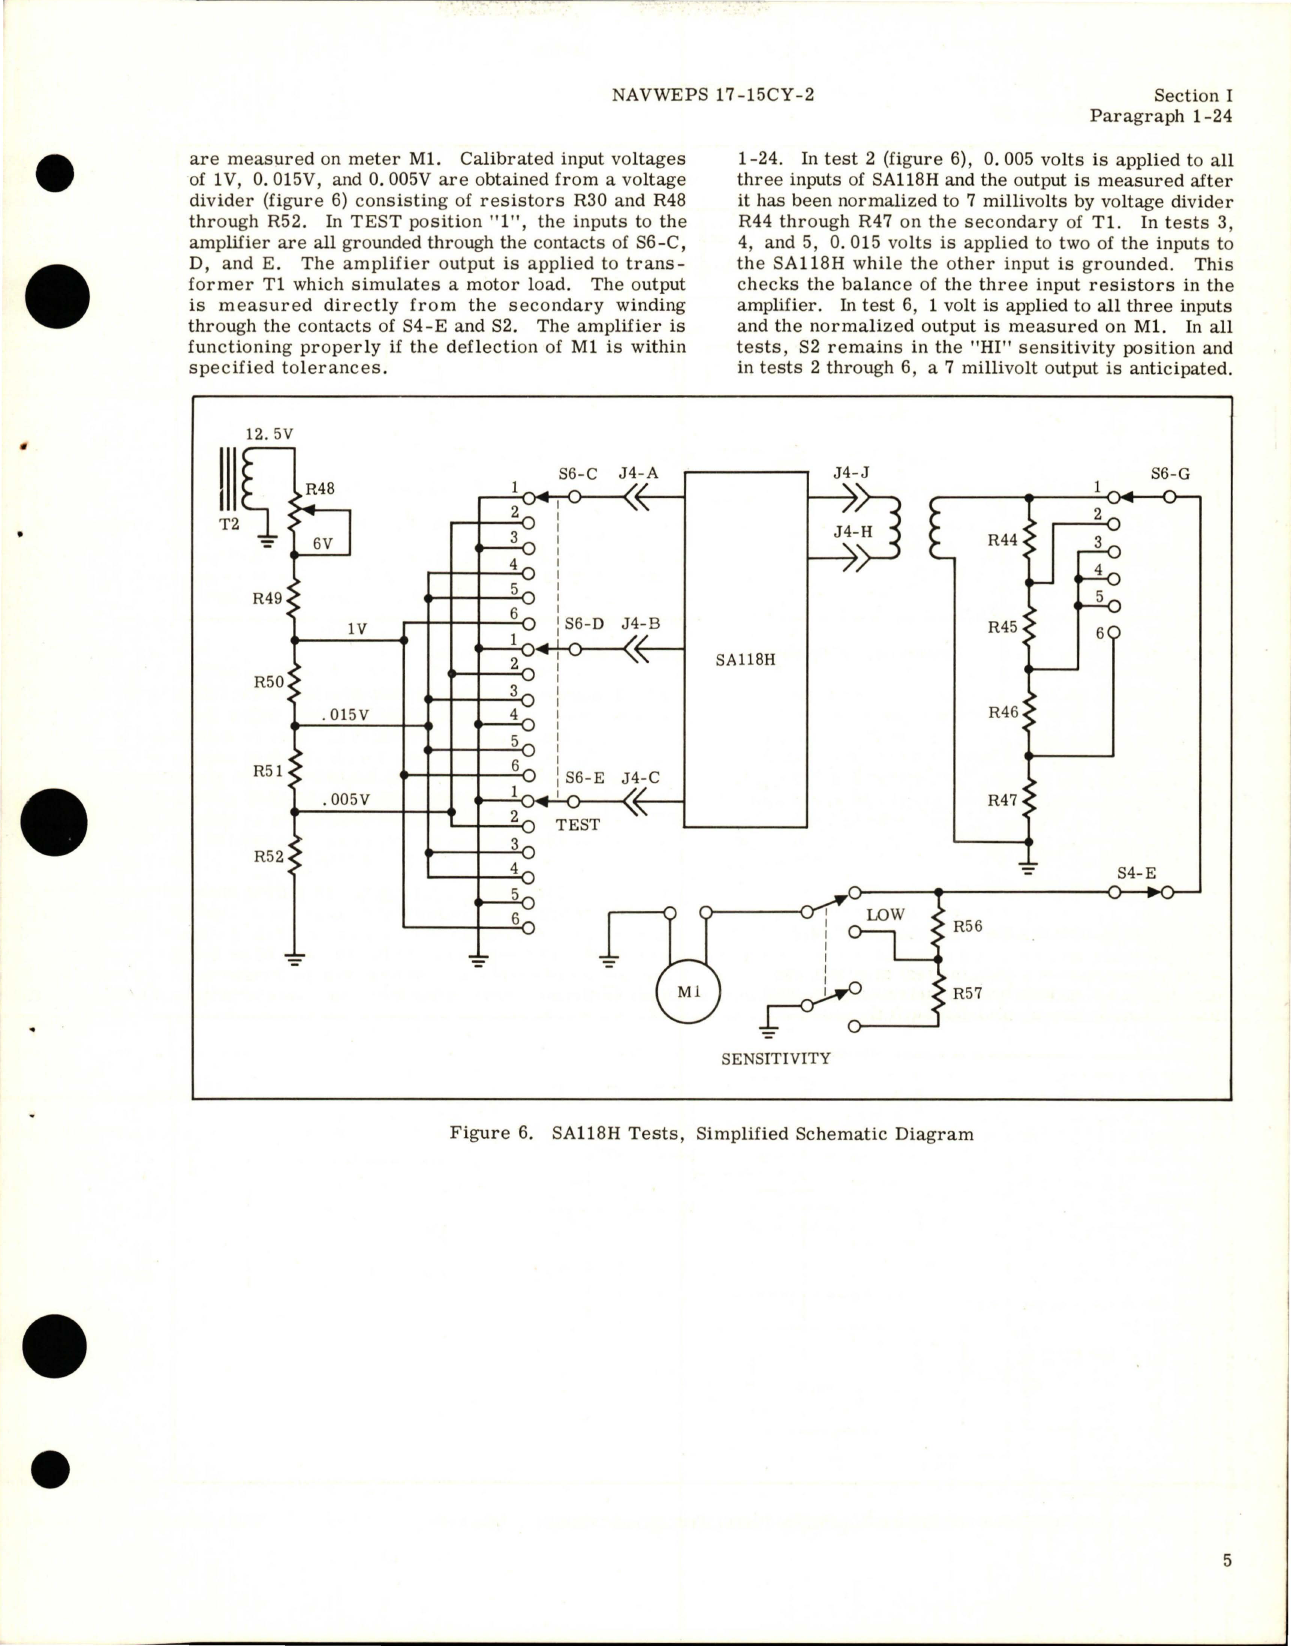 Sample page 9 from AirCorps Library document: Operation, Service Instructions with Illustrated Parts Breakdown for True Airspeed Computer Test Set - Type WS2020, Part 816424